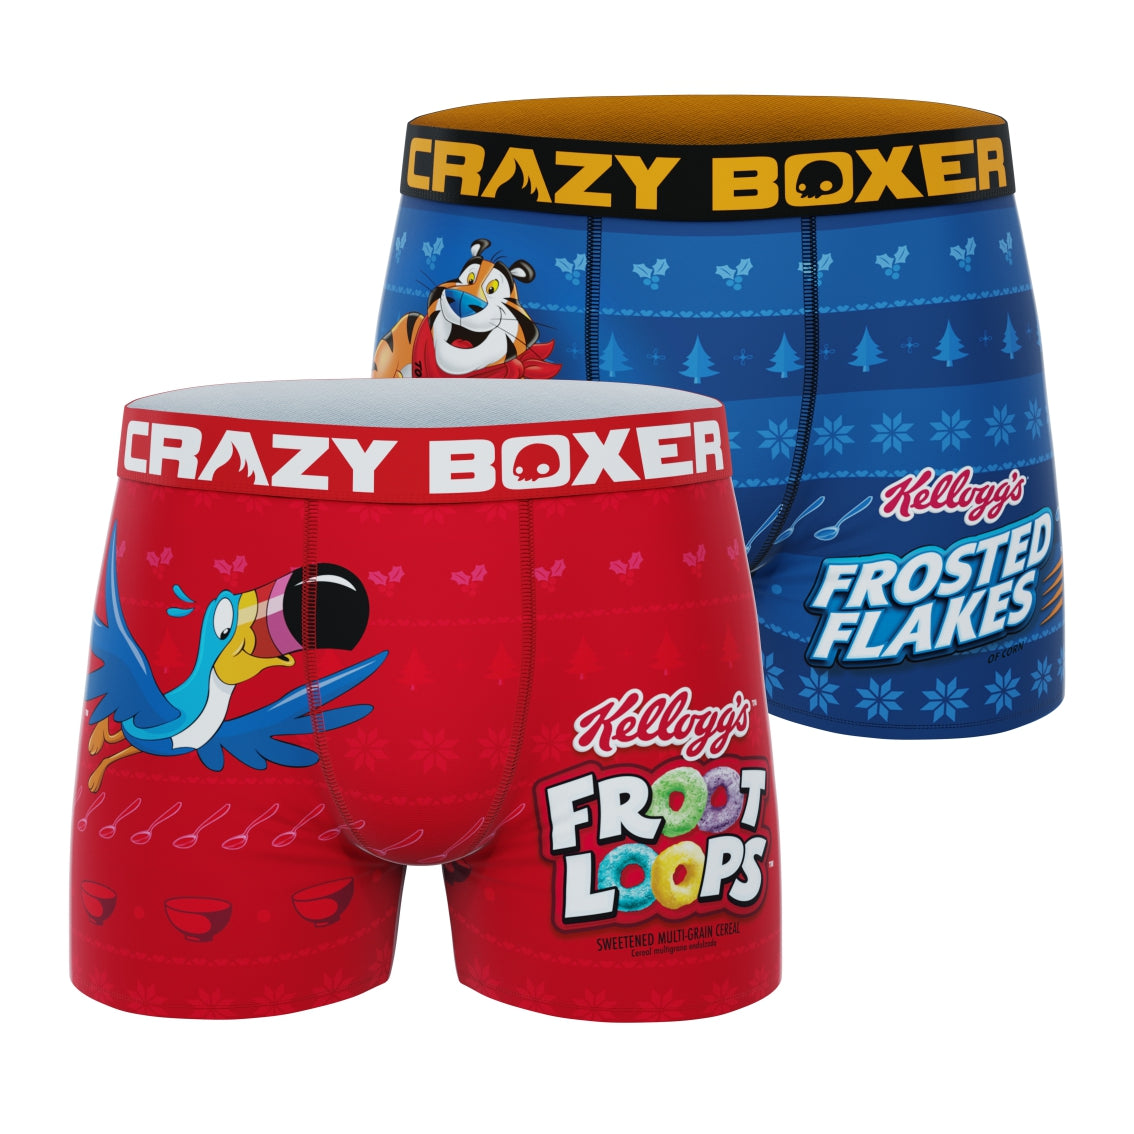 CRAZYBOXER Kellogg's Frosted Flakes and Froot Loops Men's Boxer